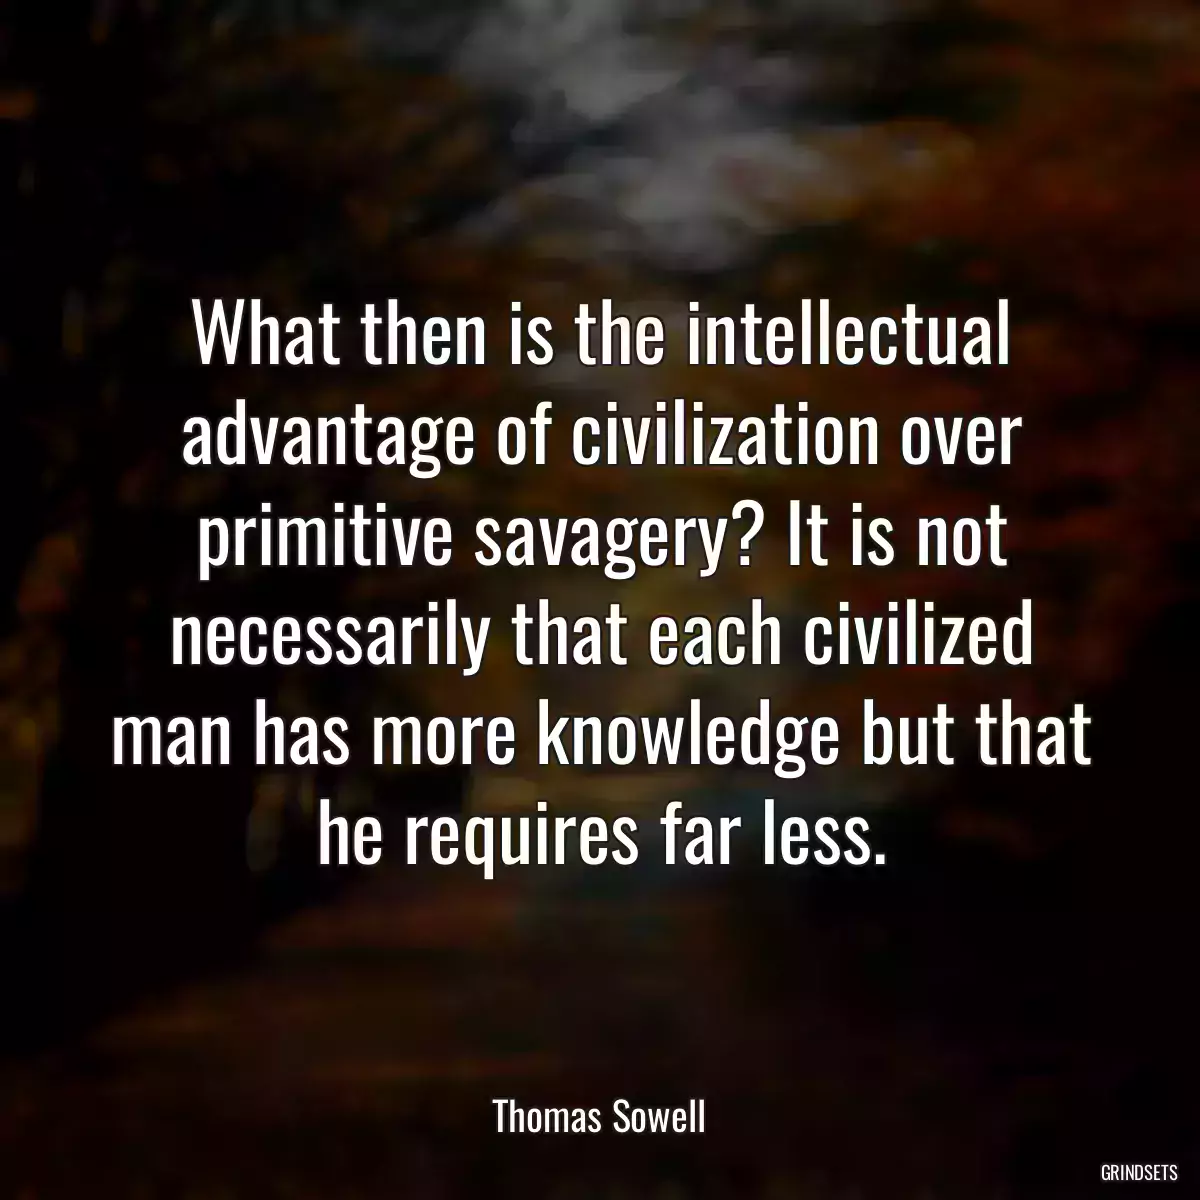 What then is the intellectual advantage of civilization over primitive savagery? It is not necessarily that each civilized man has more knowledge but that he requires far less.